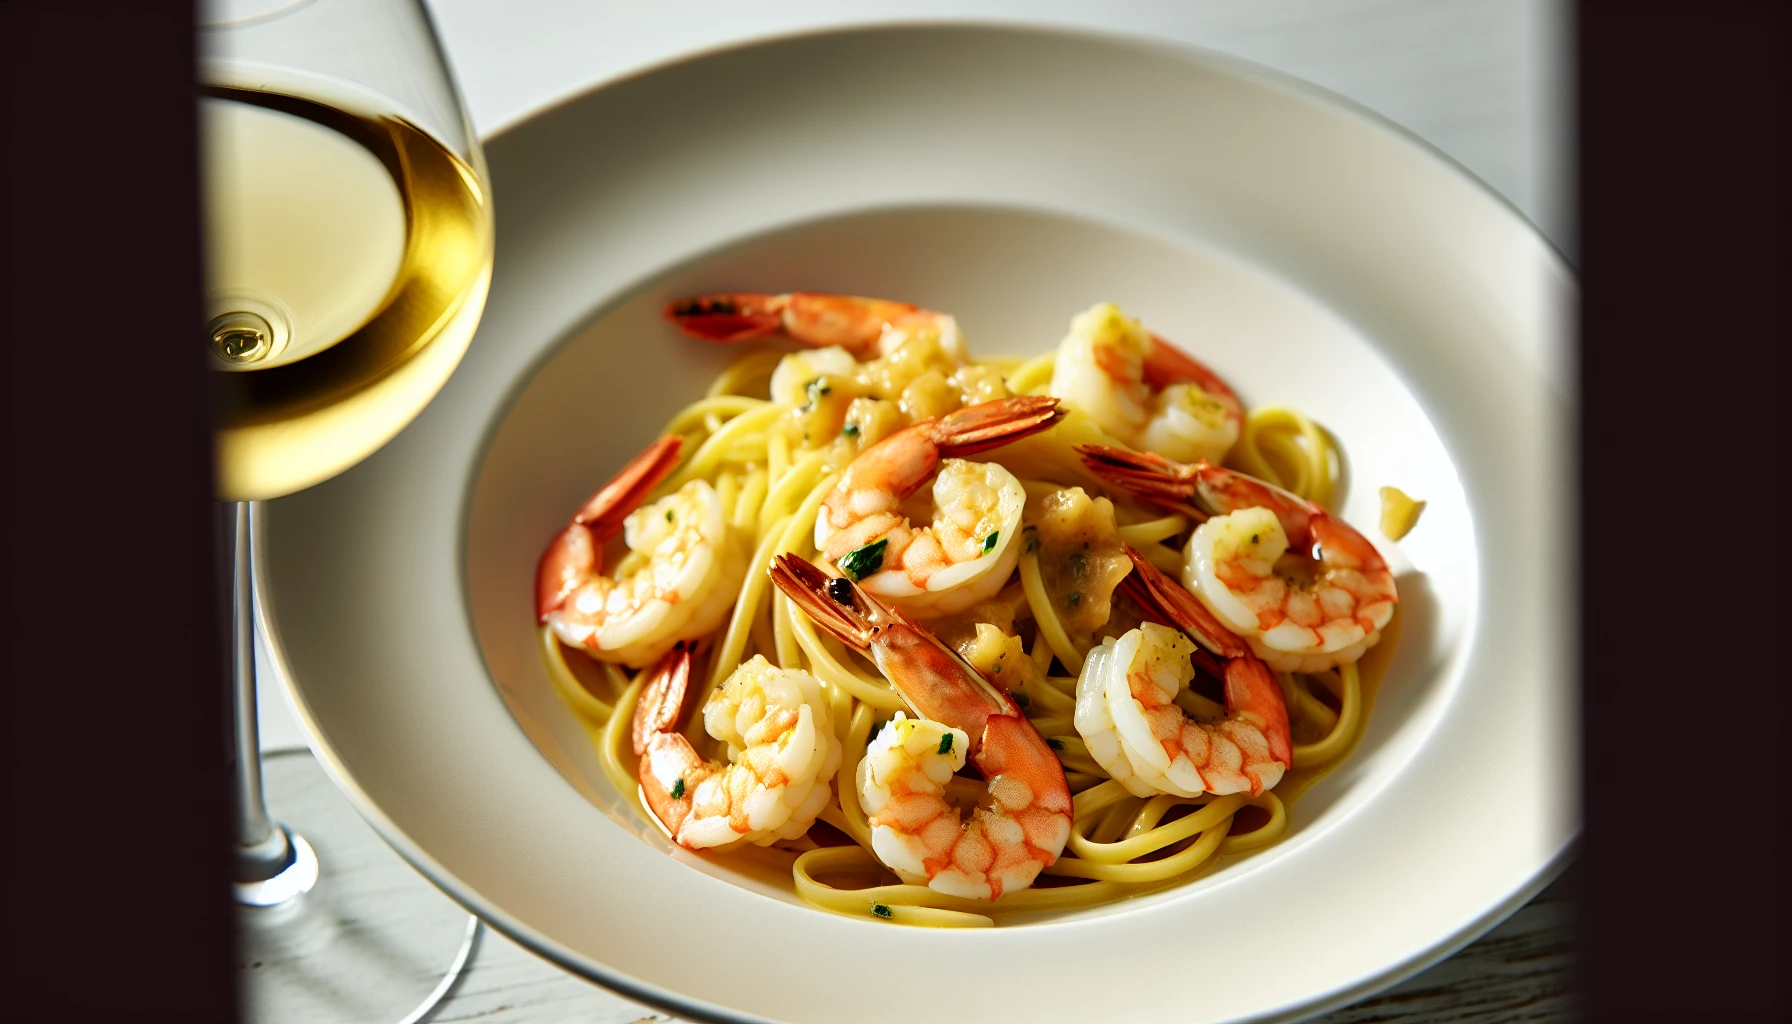 A plate of delicious shrimp scampi with pasta and a glass of white wine